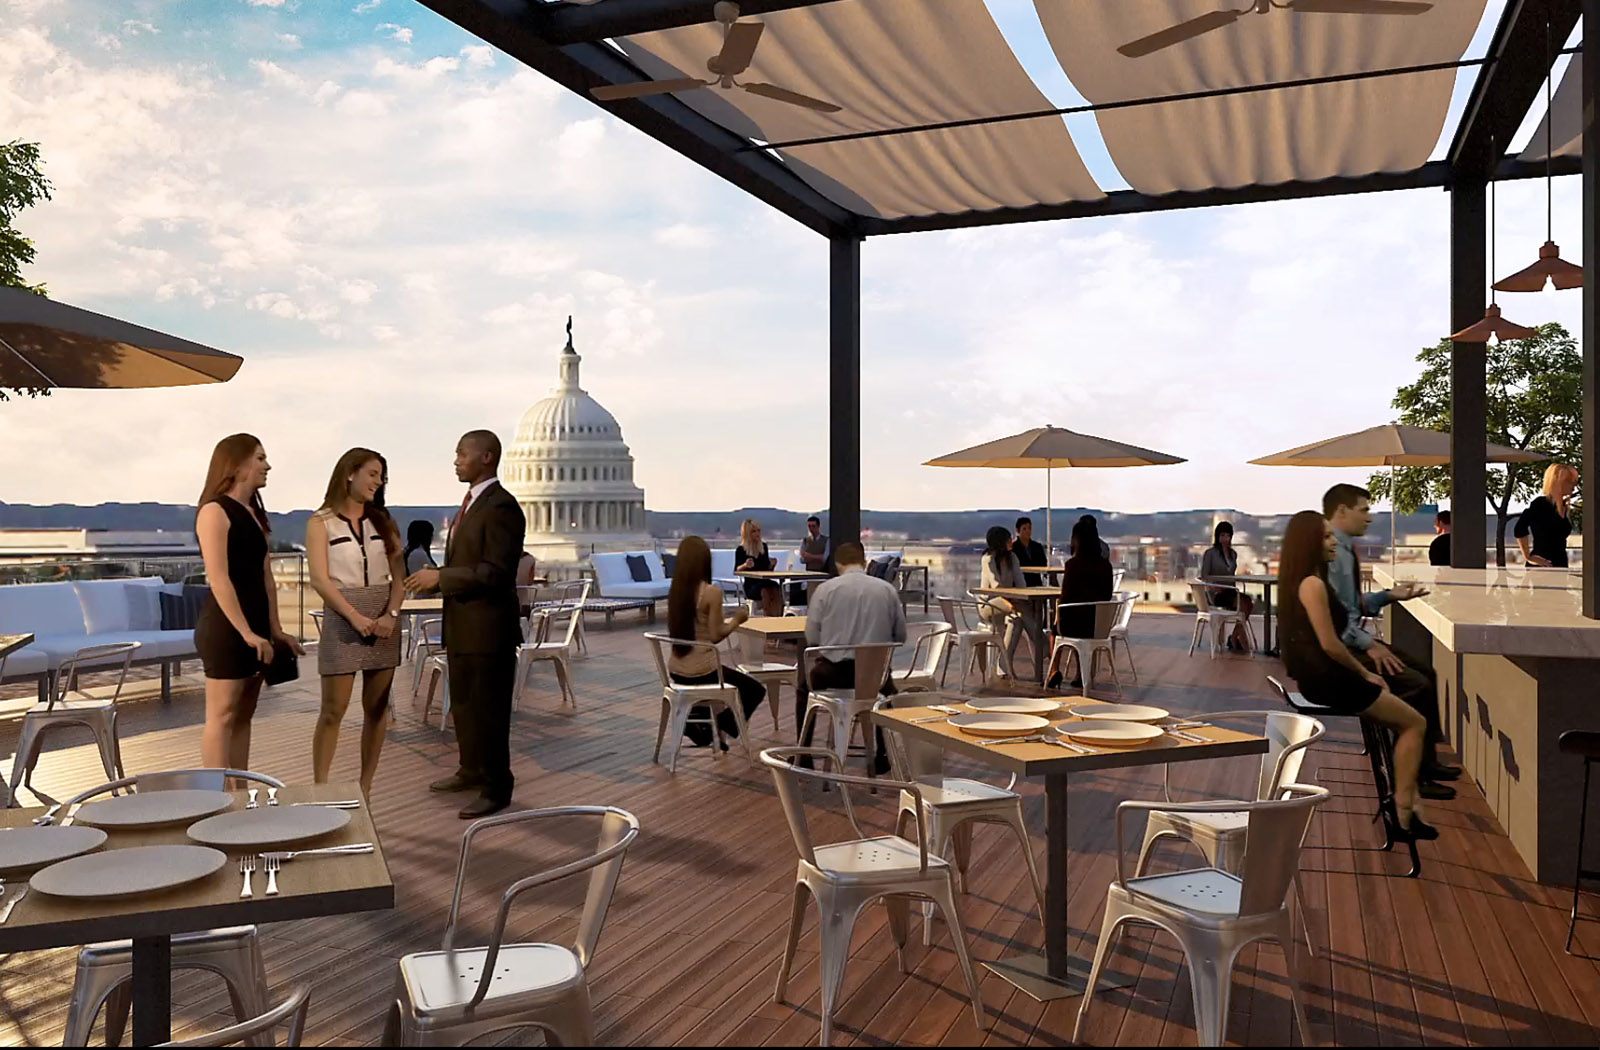 A view of the rooftop terrace at 200 F Street  with a view of the U.S. Capitol The building will be constructed as part of the new Capitol Crossing development. The $1.3 billion project will include 5 structures and will be built on top of Interstate 395 (Courtesy Property Group Partners)